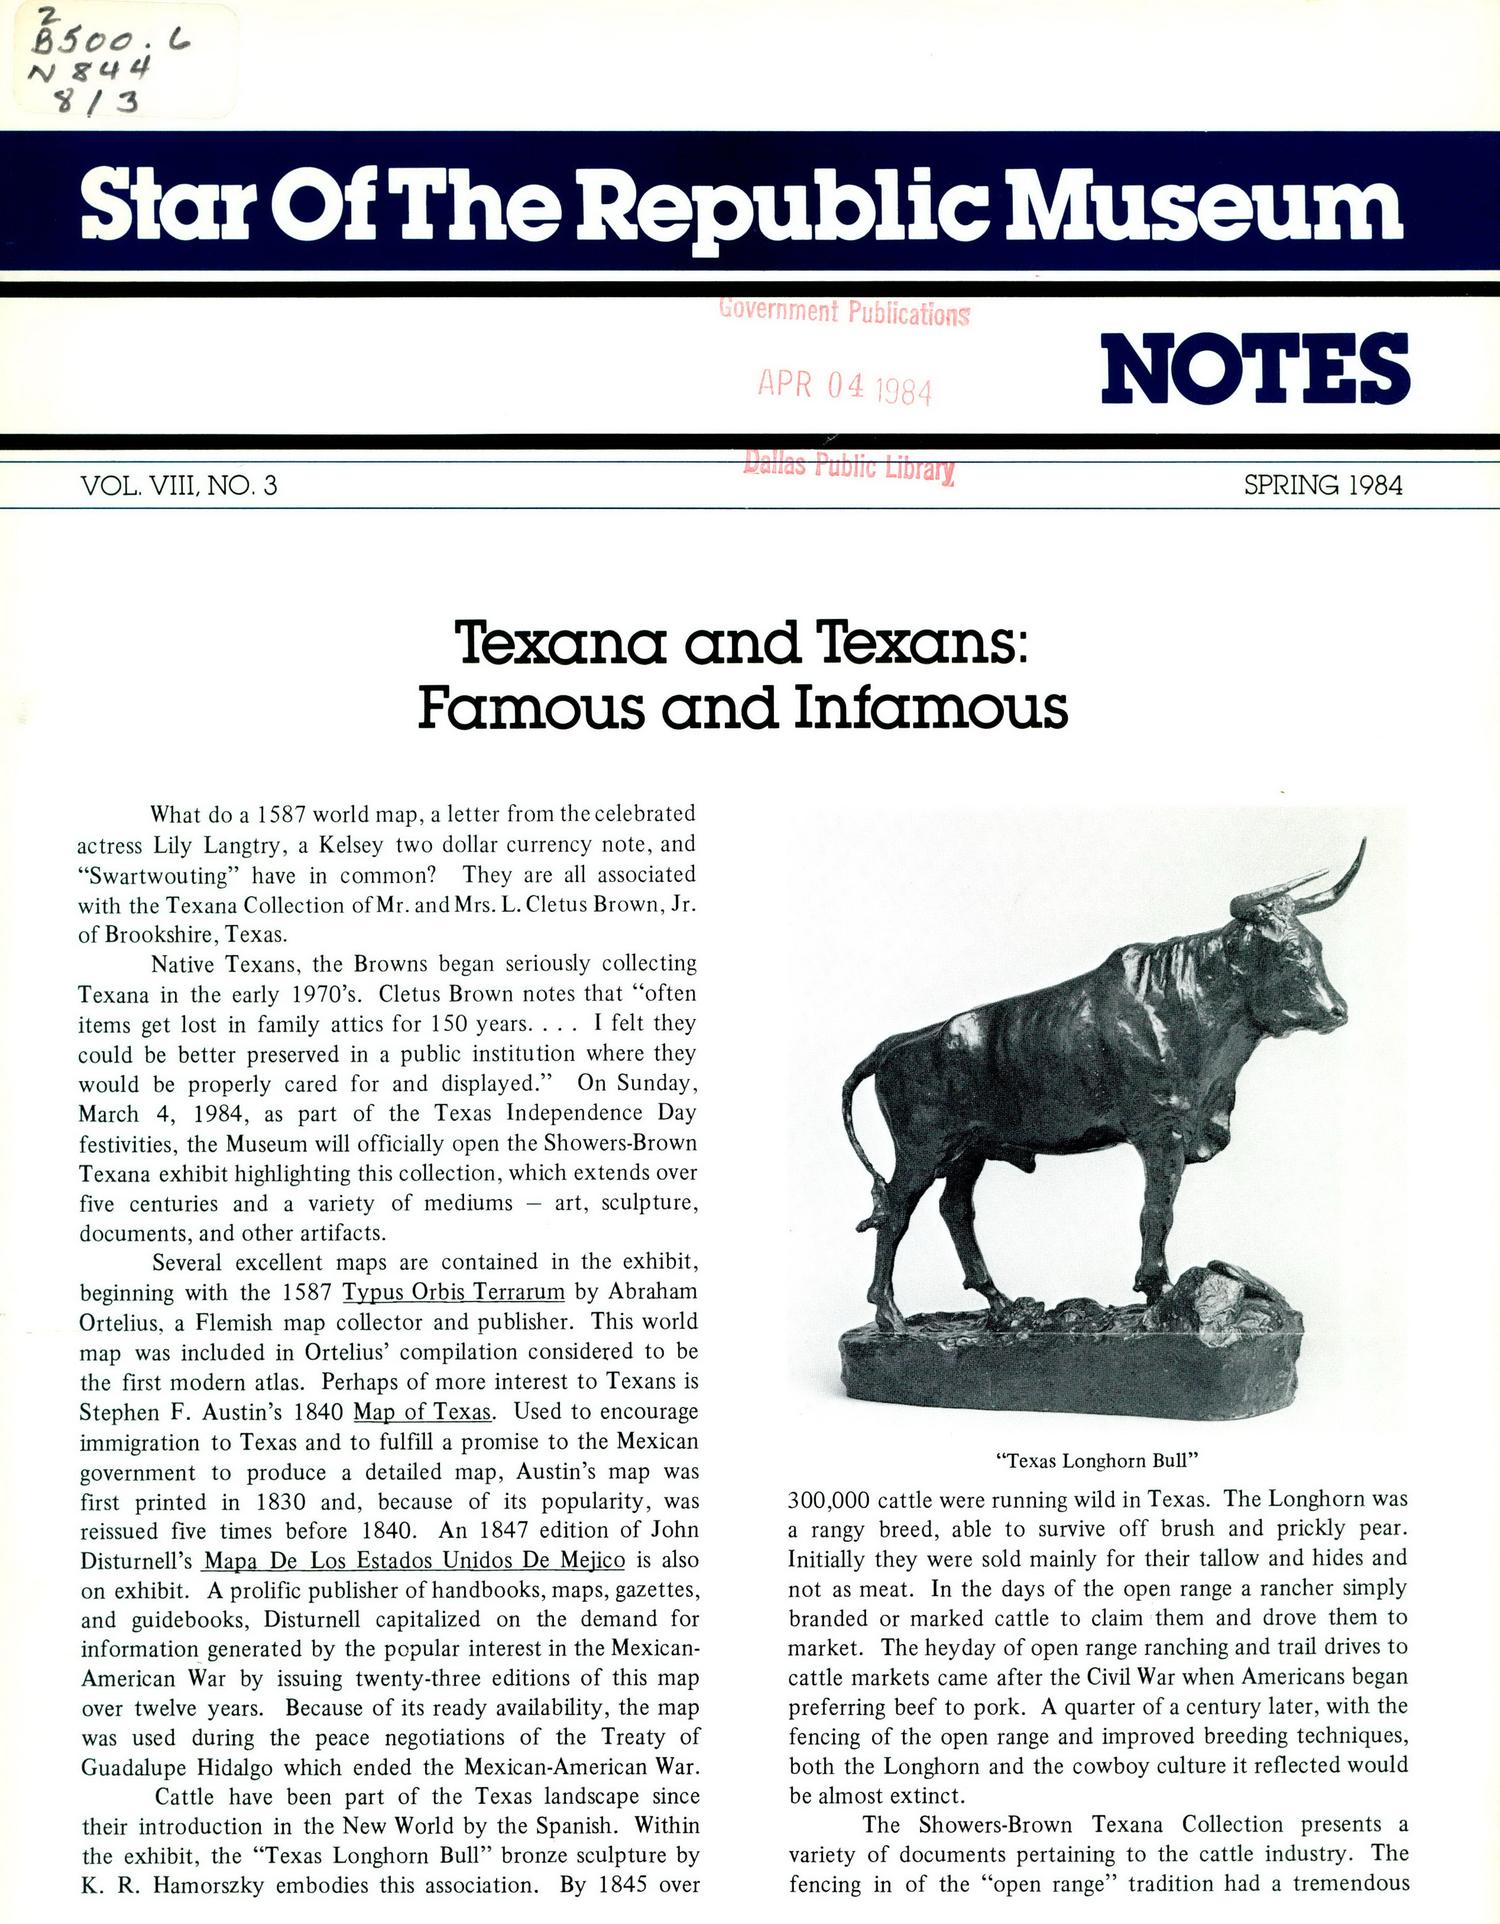 Star of the Republic Museum Notes, Volume 8, Number 3, Spring 1984
                                                
                                                    FRONT COVER
                                                